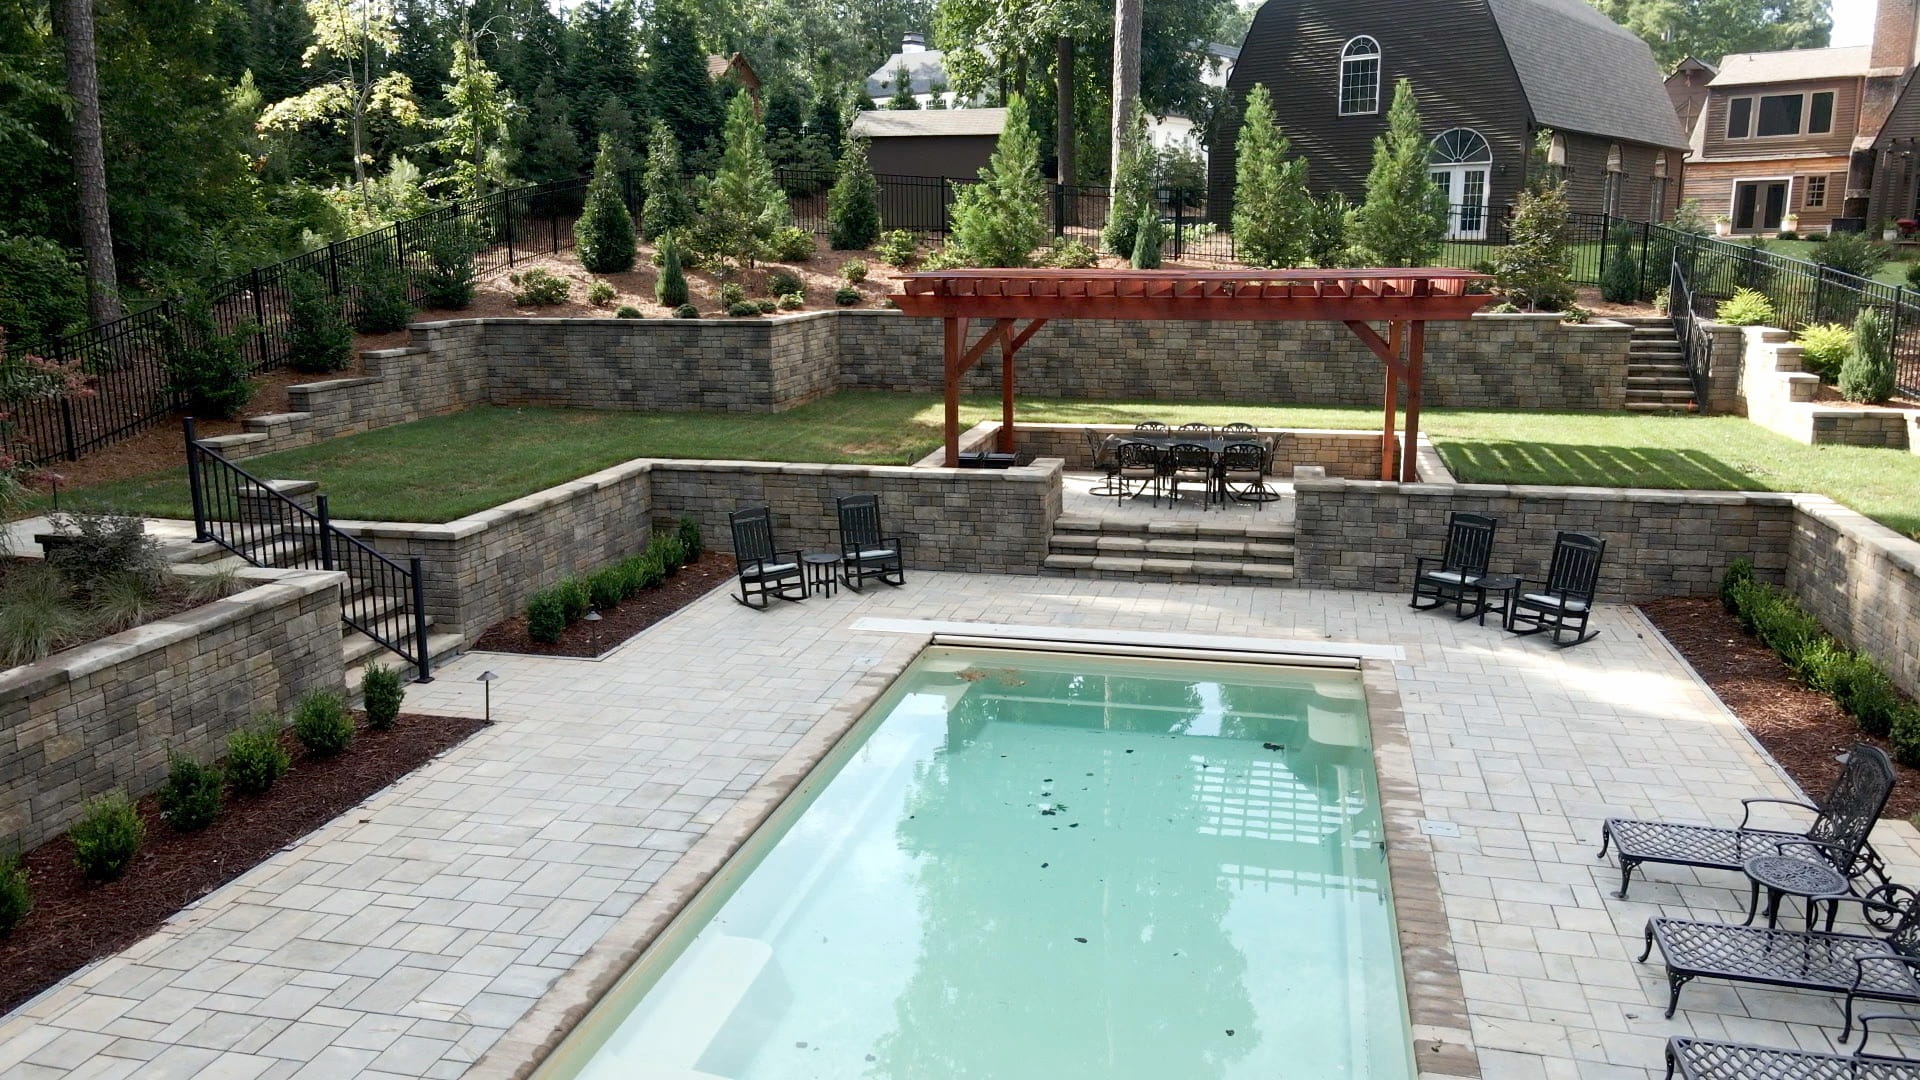 A beautiful backyard pool and hardscape job completed by Agape